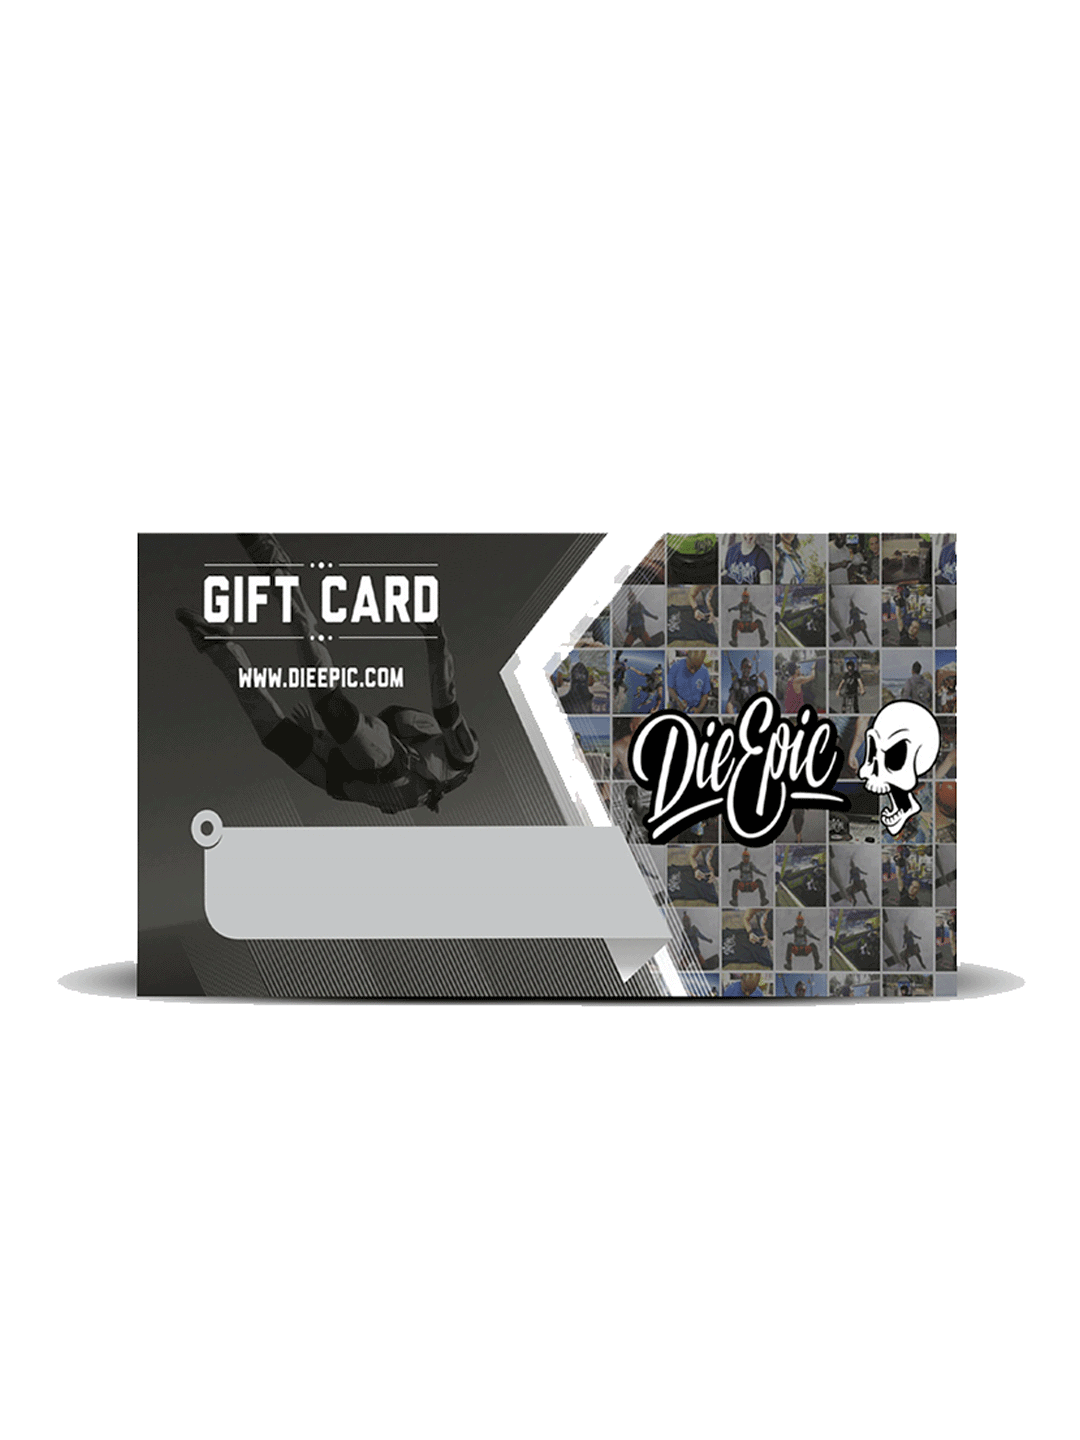 Give An 'Epic' Gift For A Future Event! Buy A Gift Card NOW & Save with  Epic Games2Go.